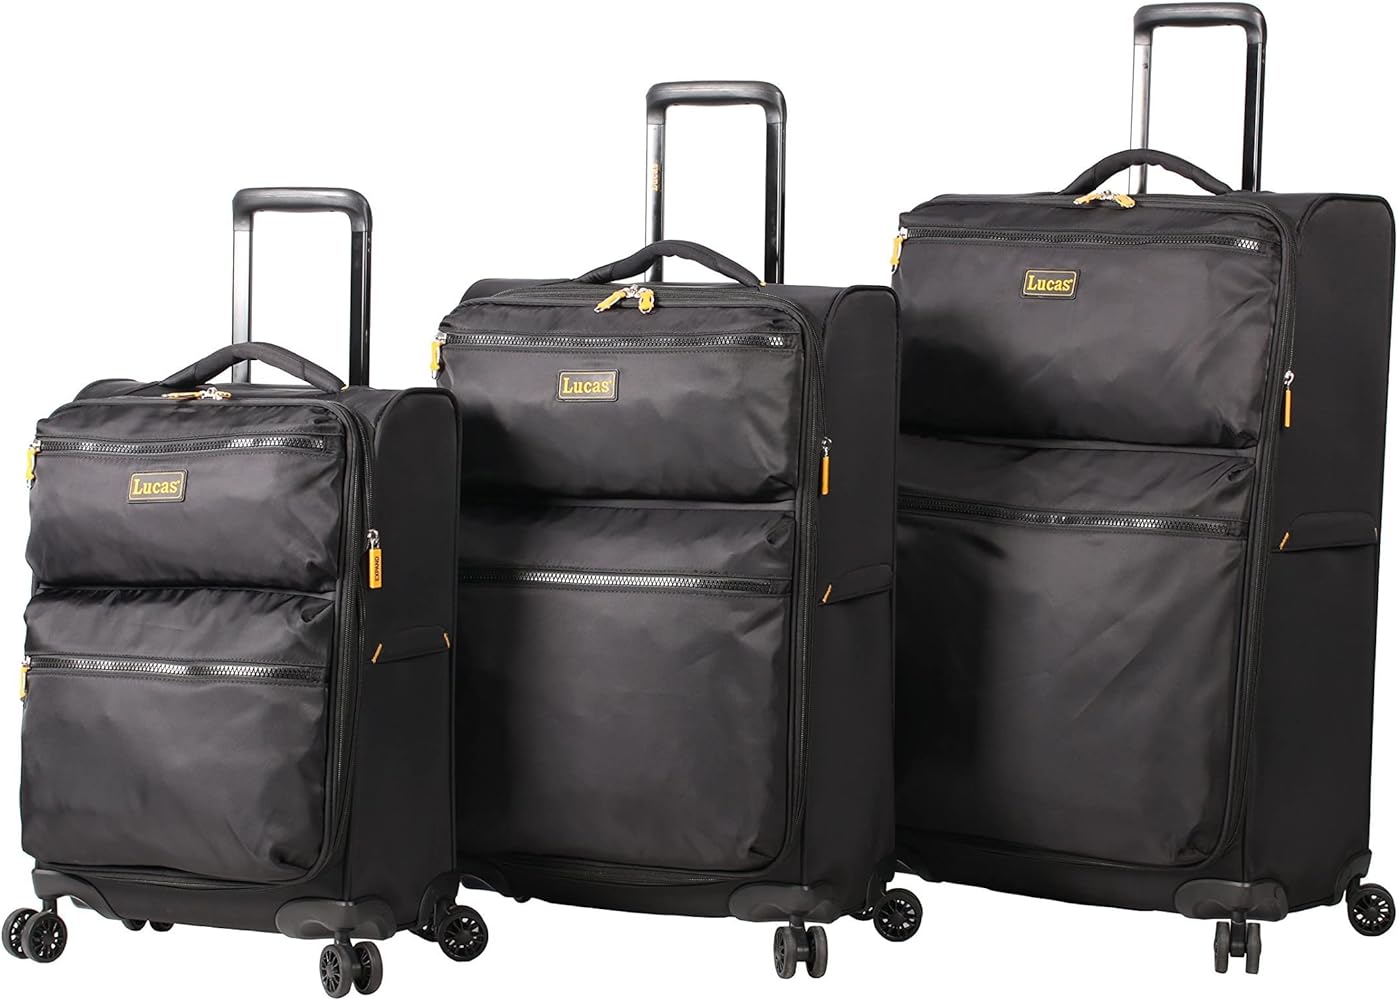 LUCAS Designer Luggage Collection Review